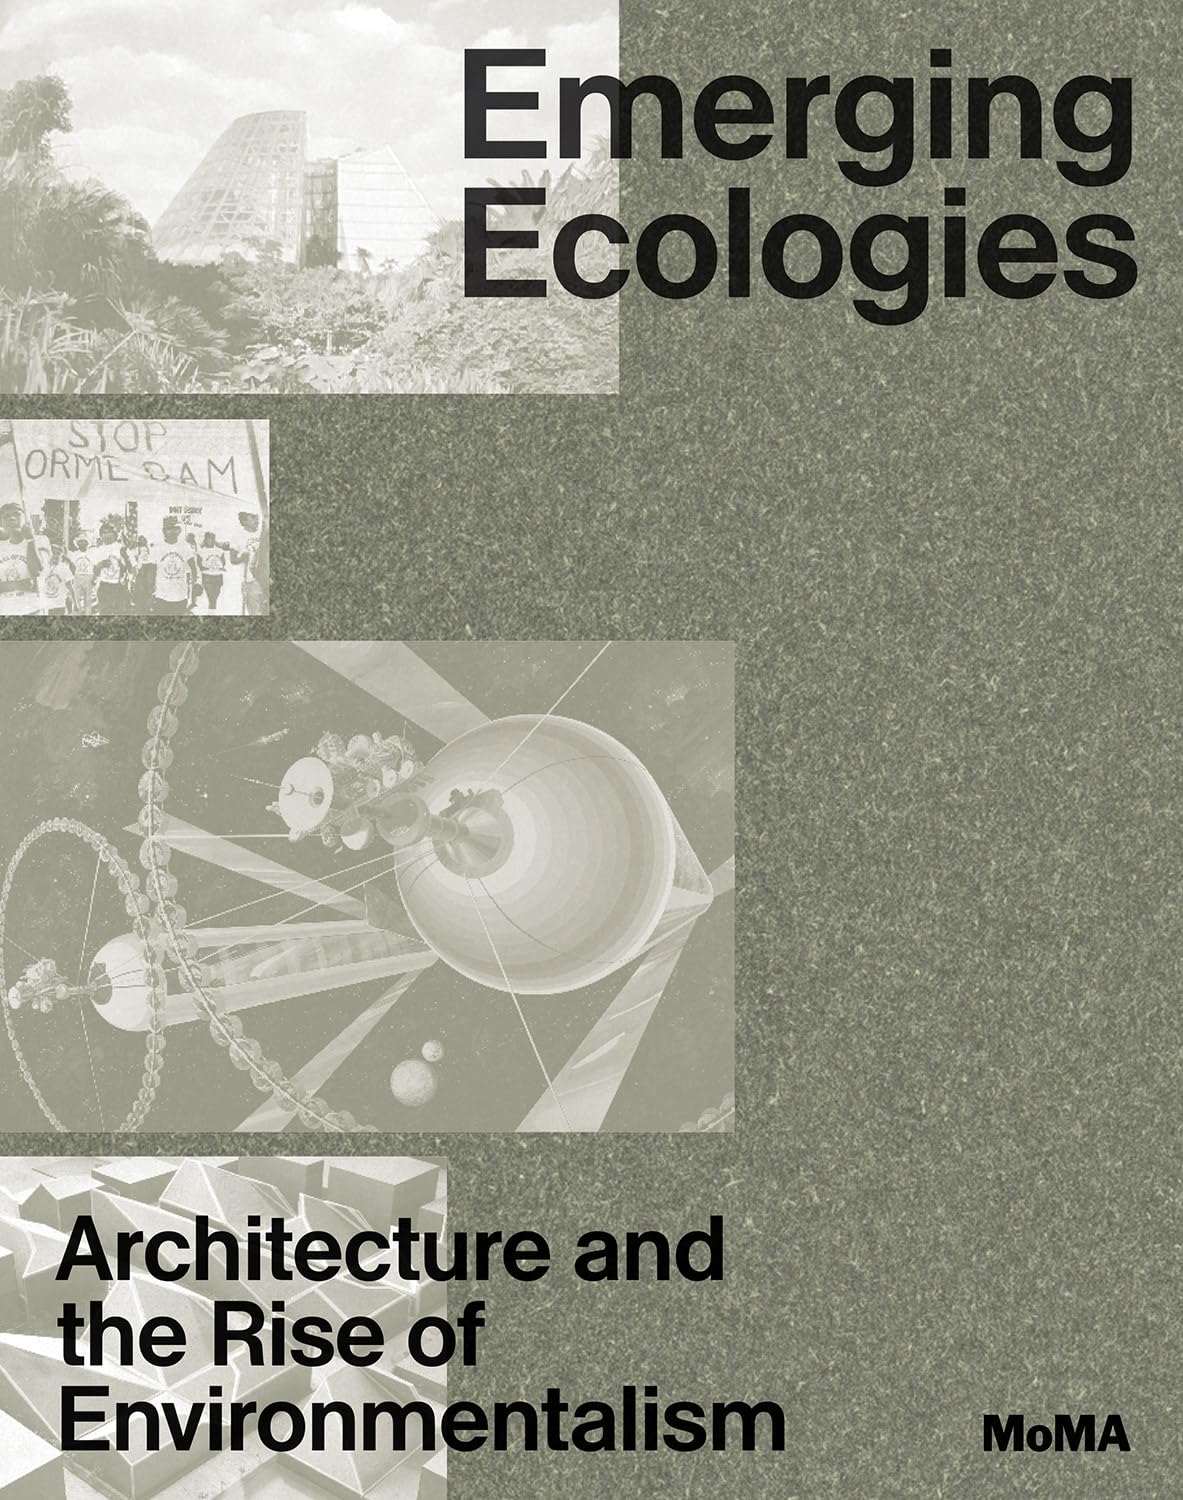 Emerging ecologies : architecture and the rise of environmentalism : a field guide